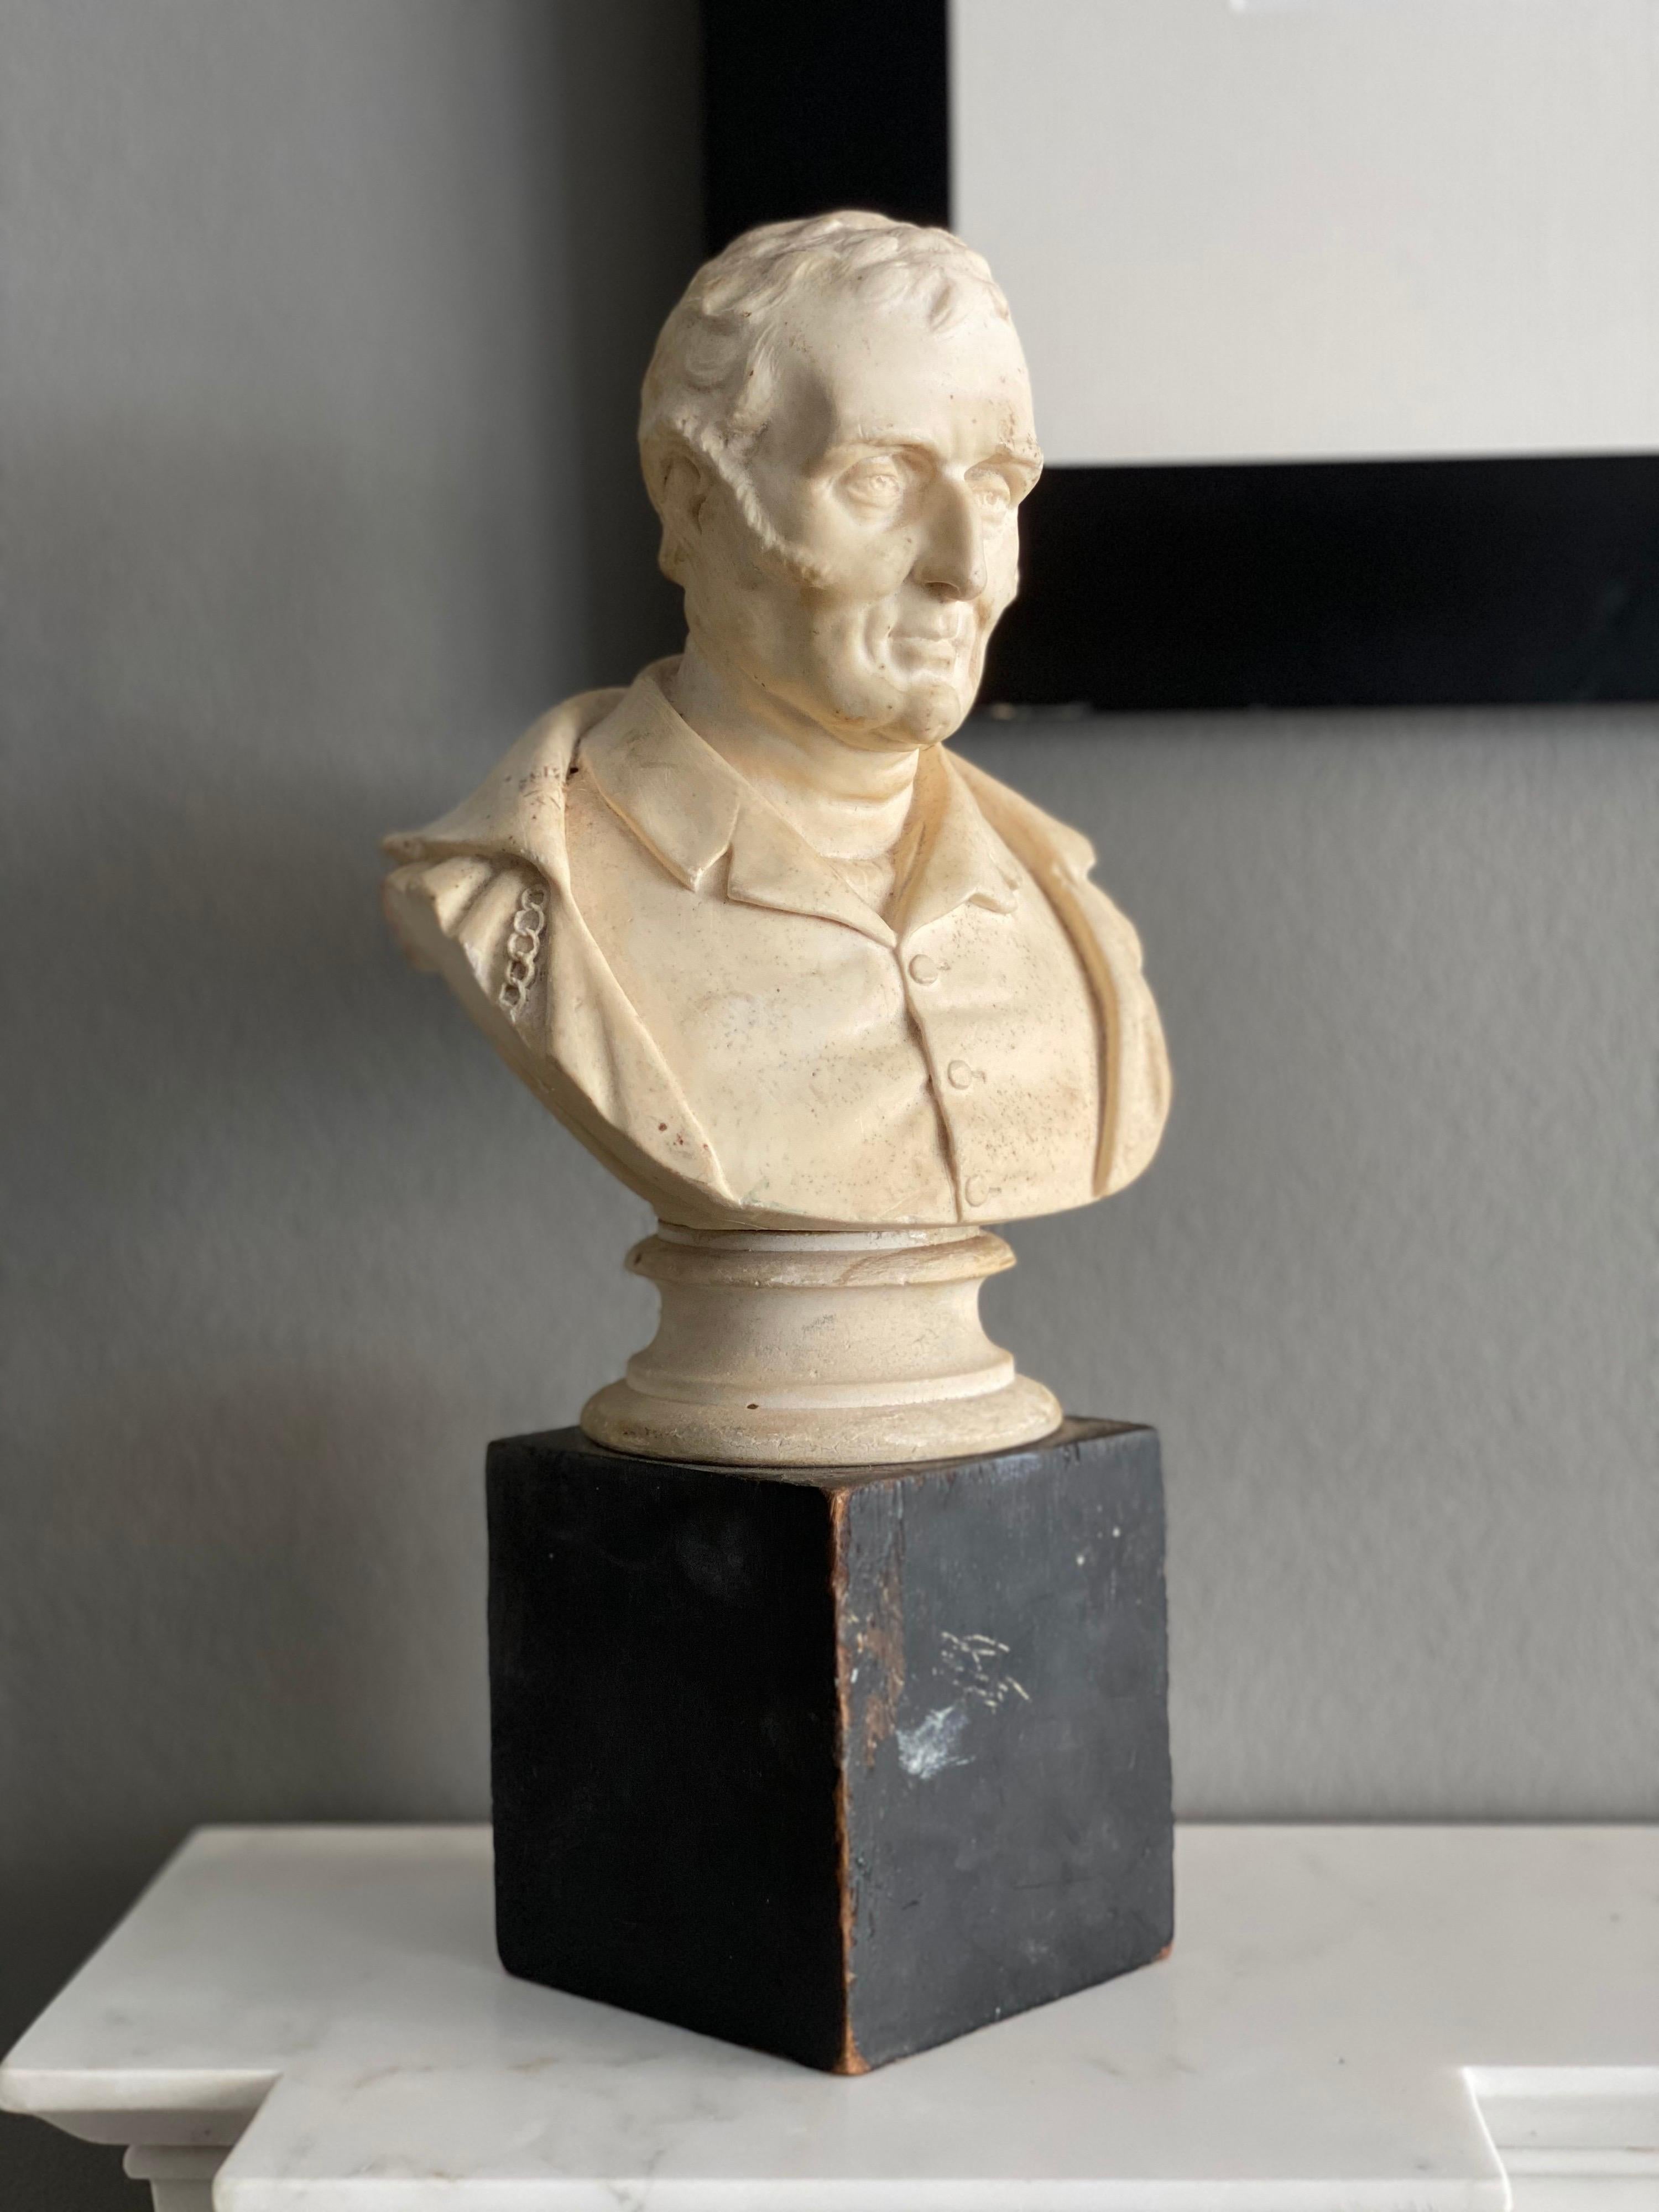 A late Victorian plaster bust of The Duke of Wellington mounted on a simple wooden block.